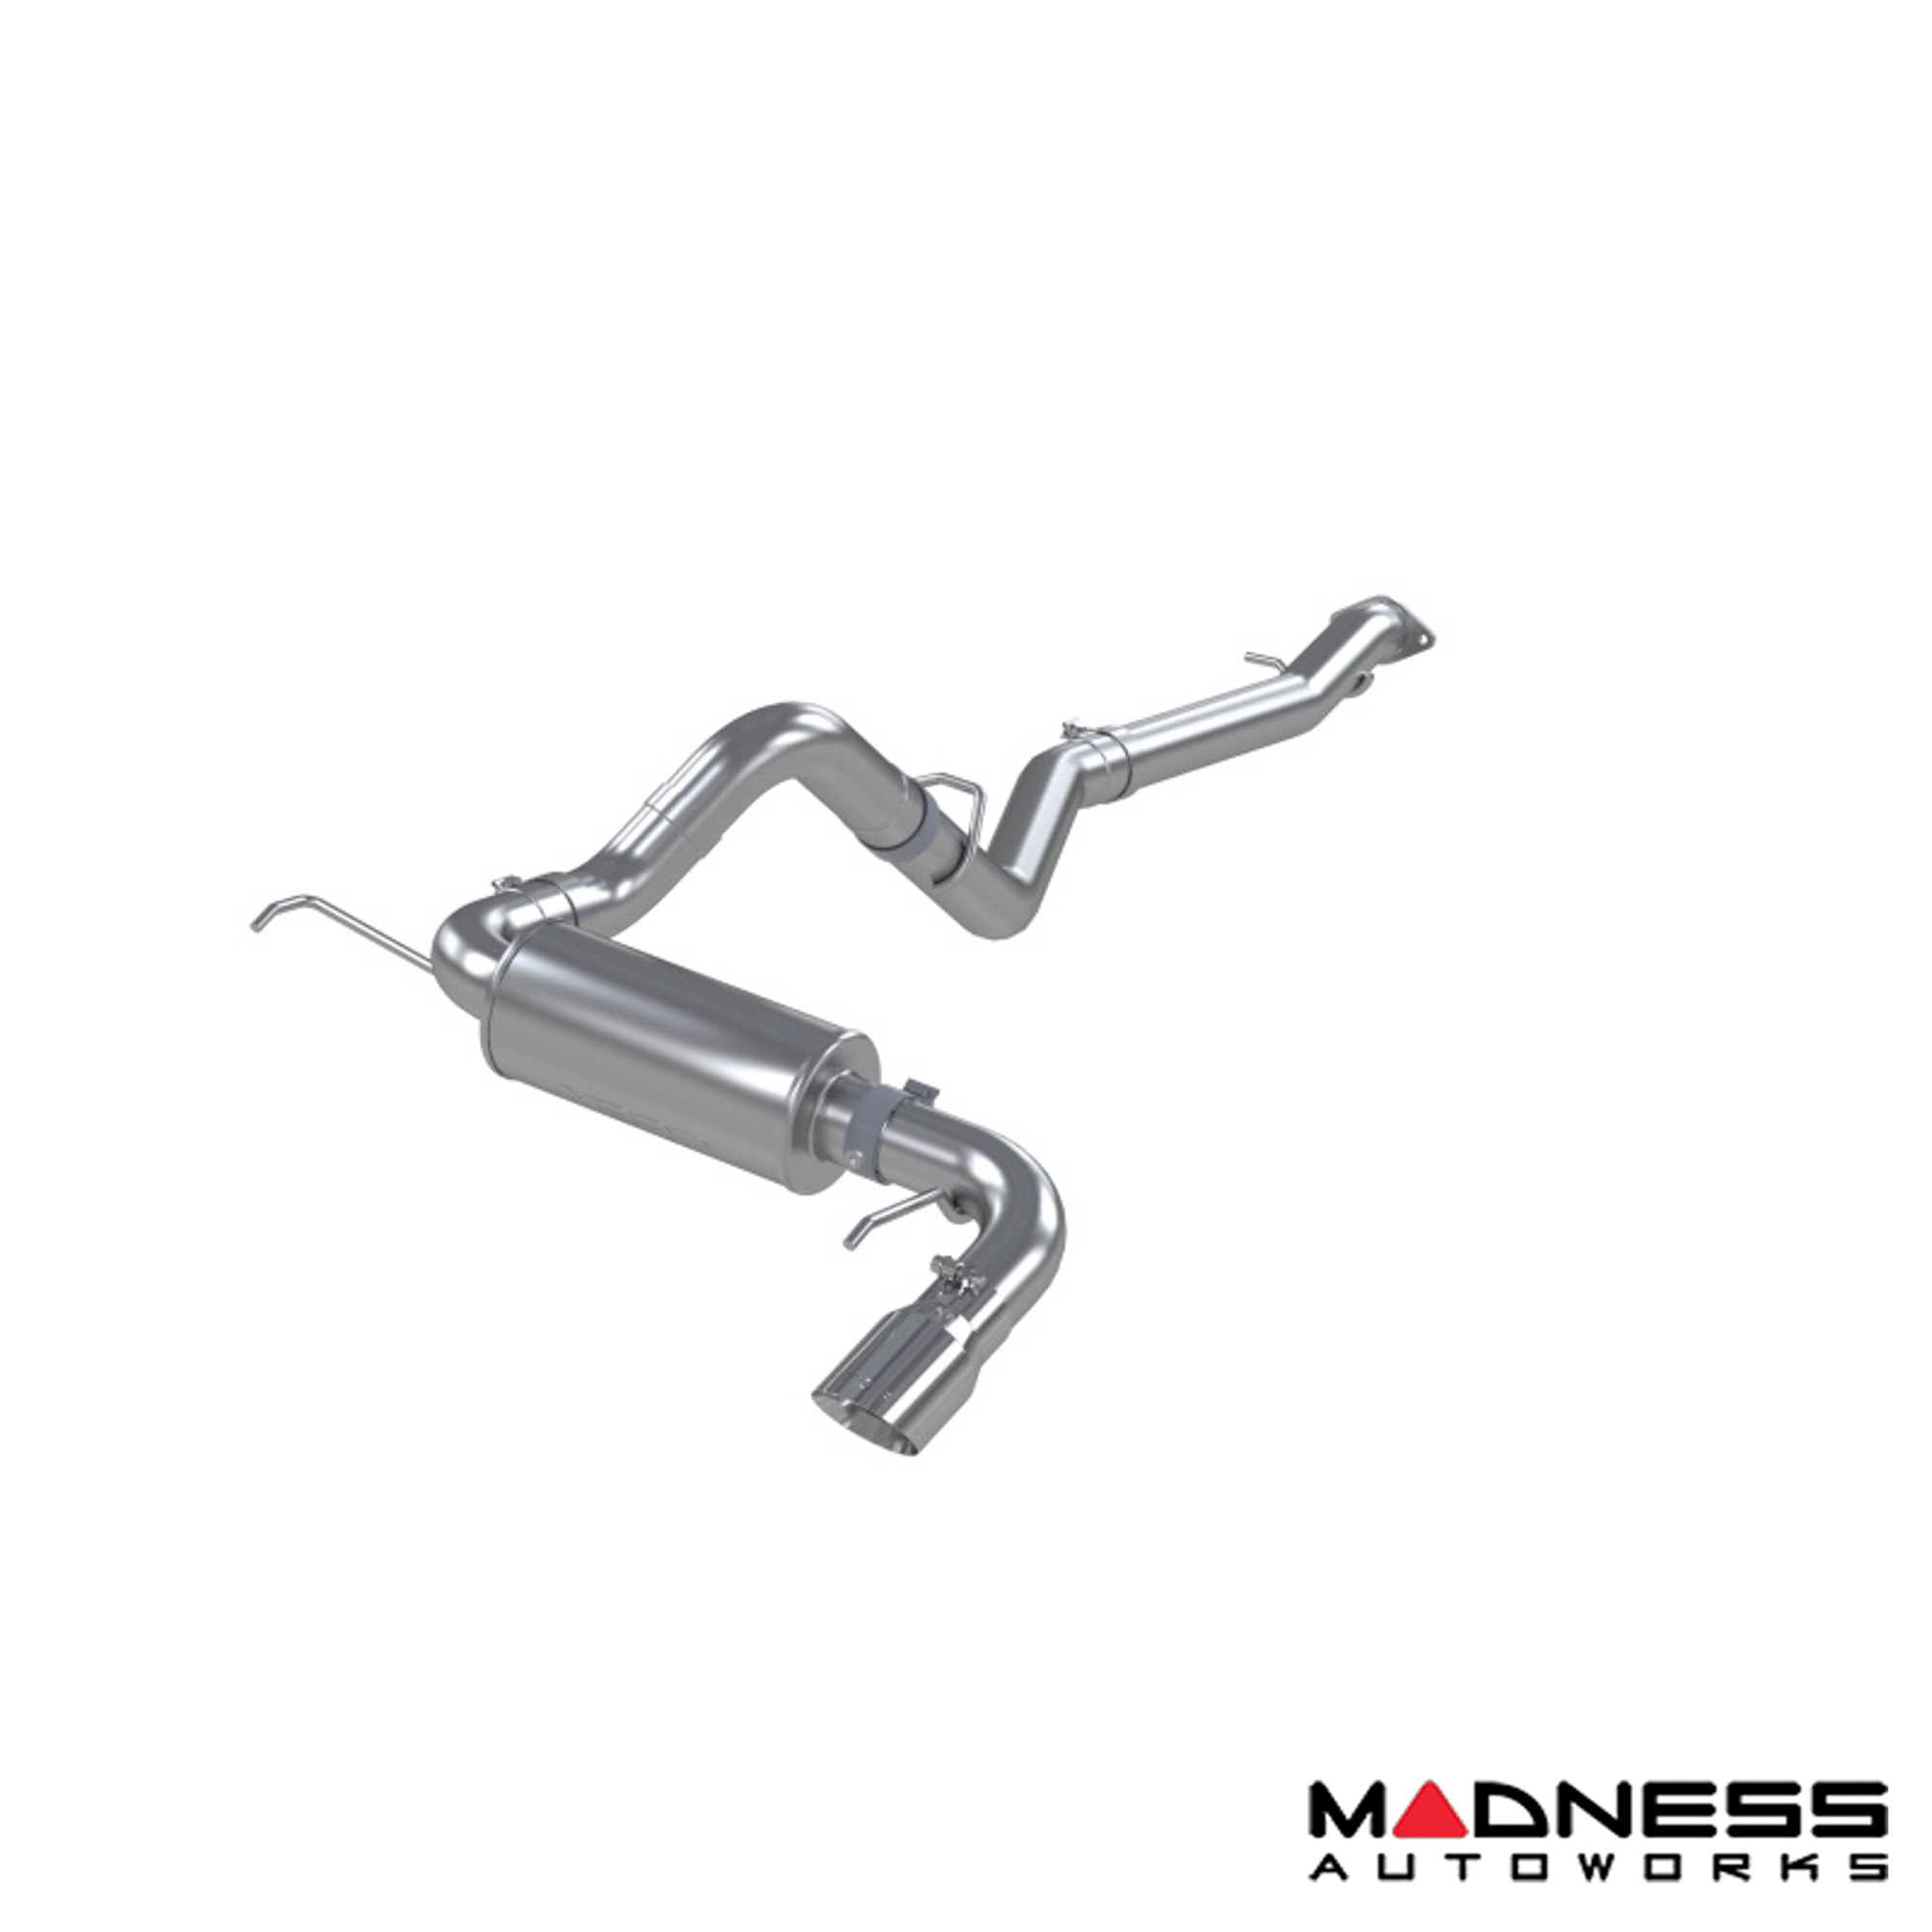 Ford Bronco Performance Exhaust System - Cat Back - High Clearance - MBRP - 3" 